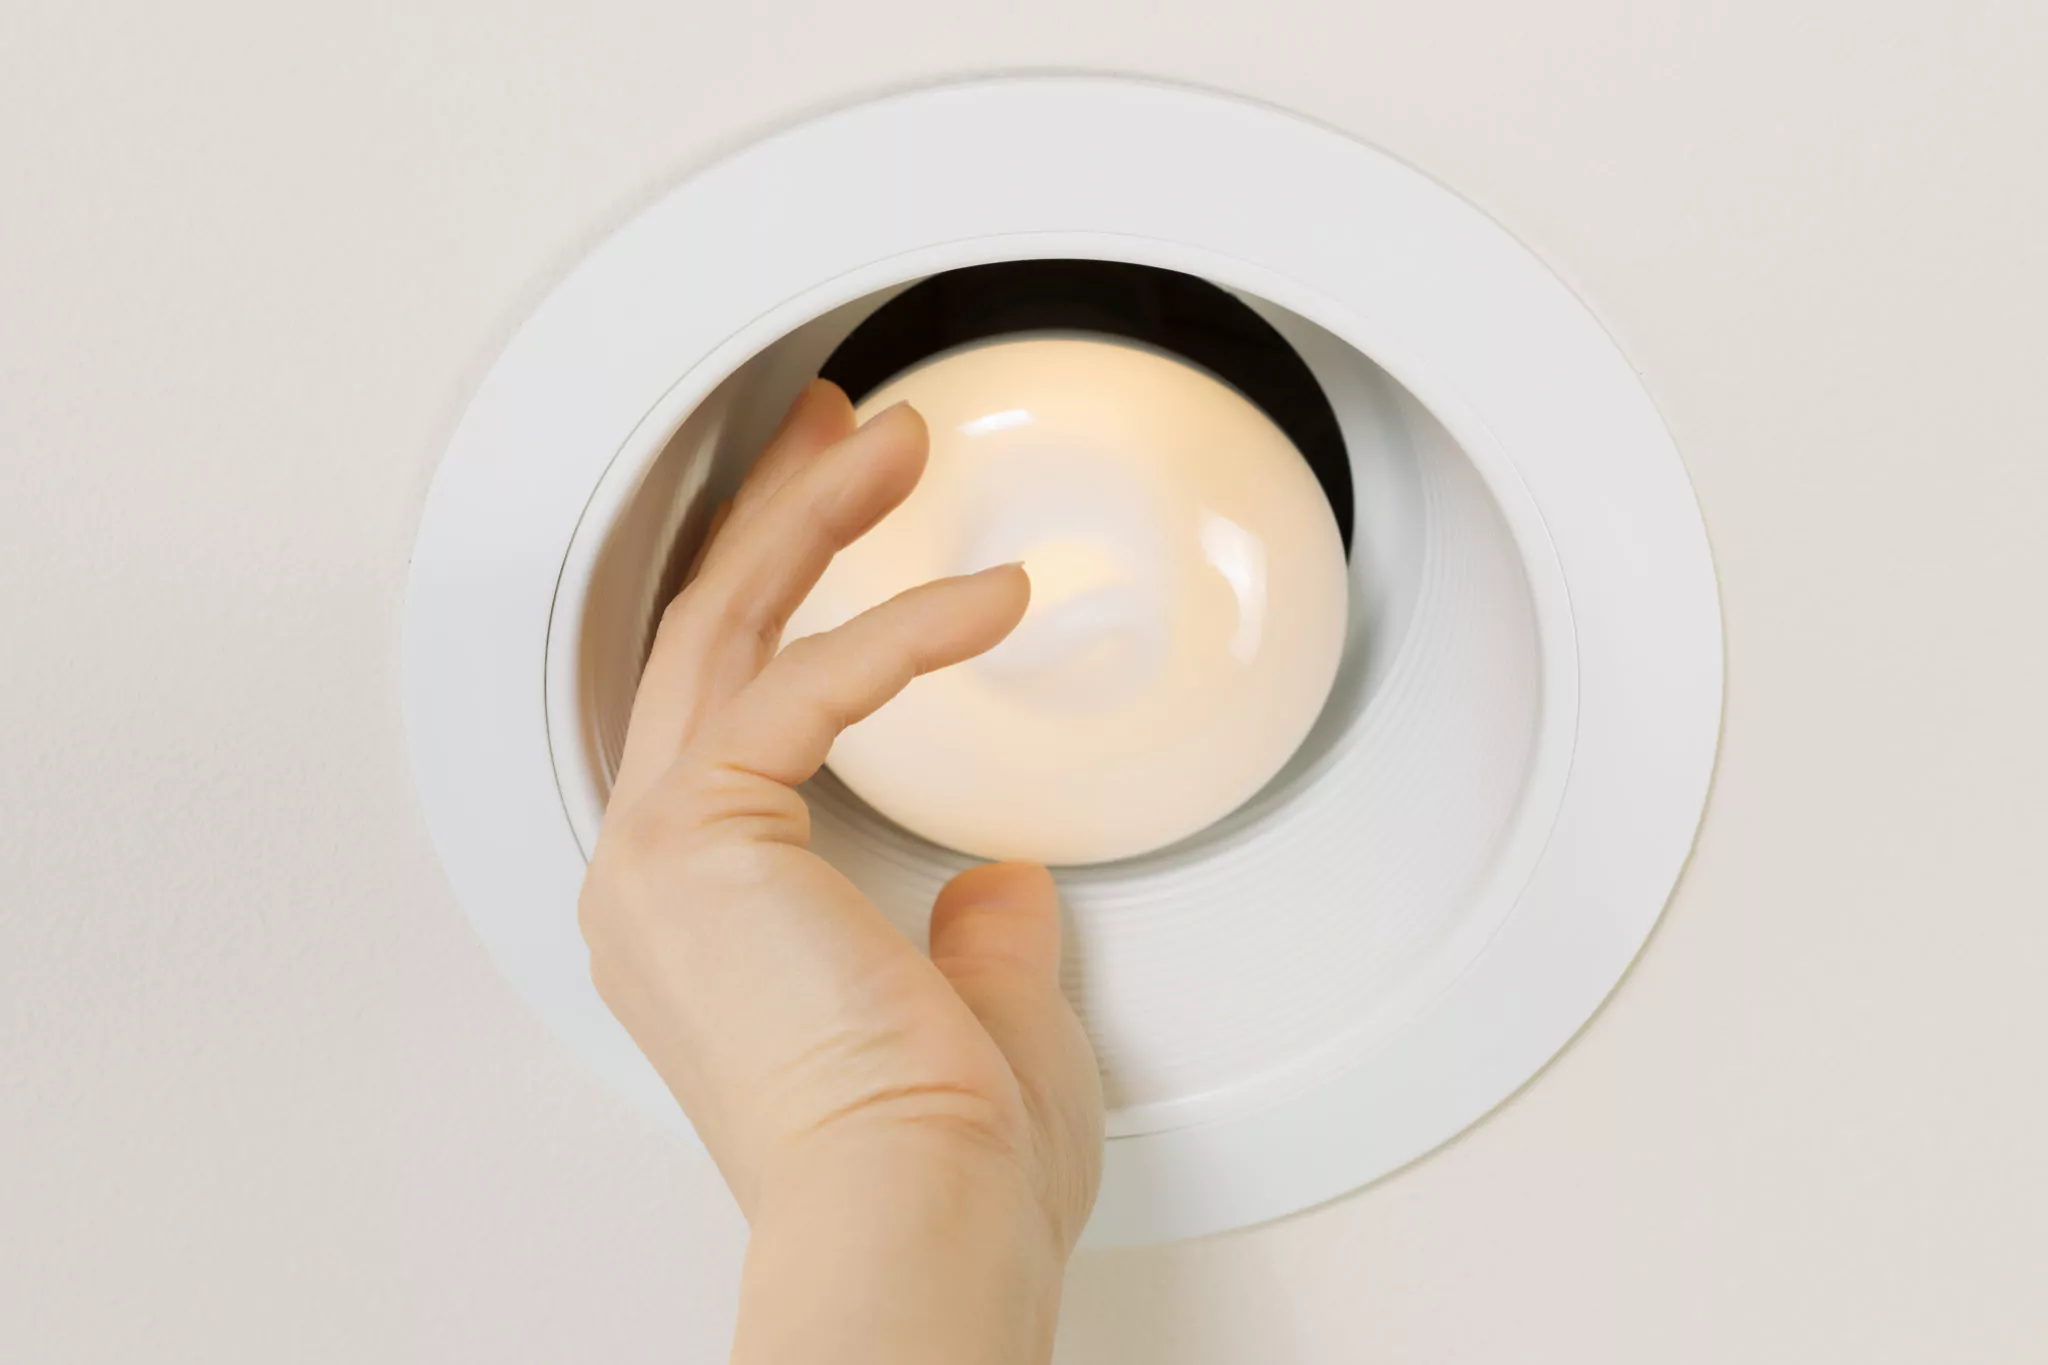 How To Install A Ceiling Light Without A Junction Box